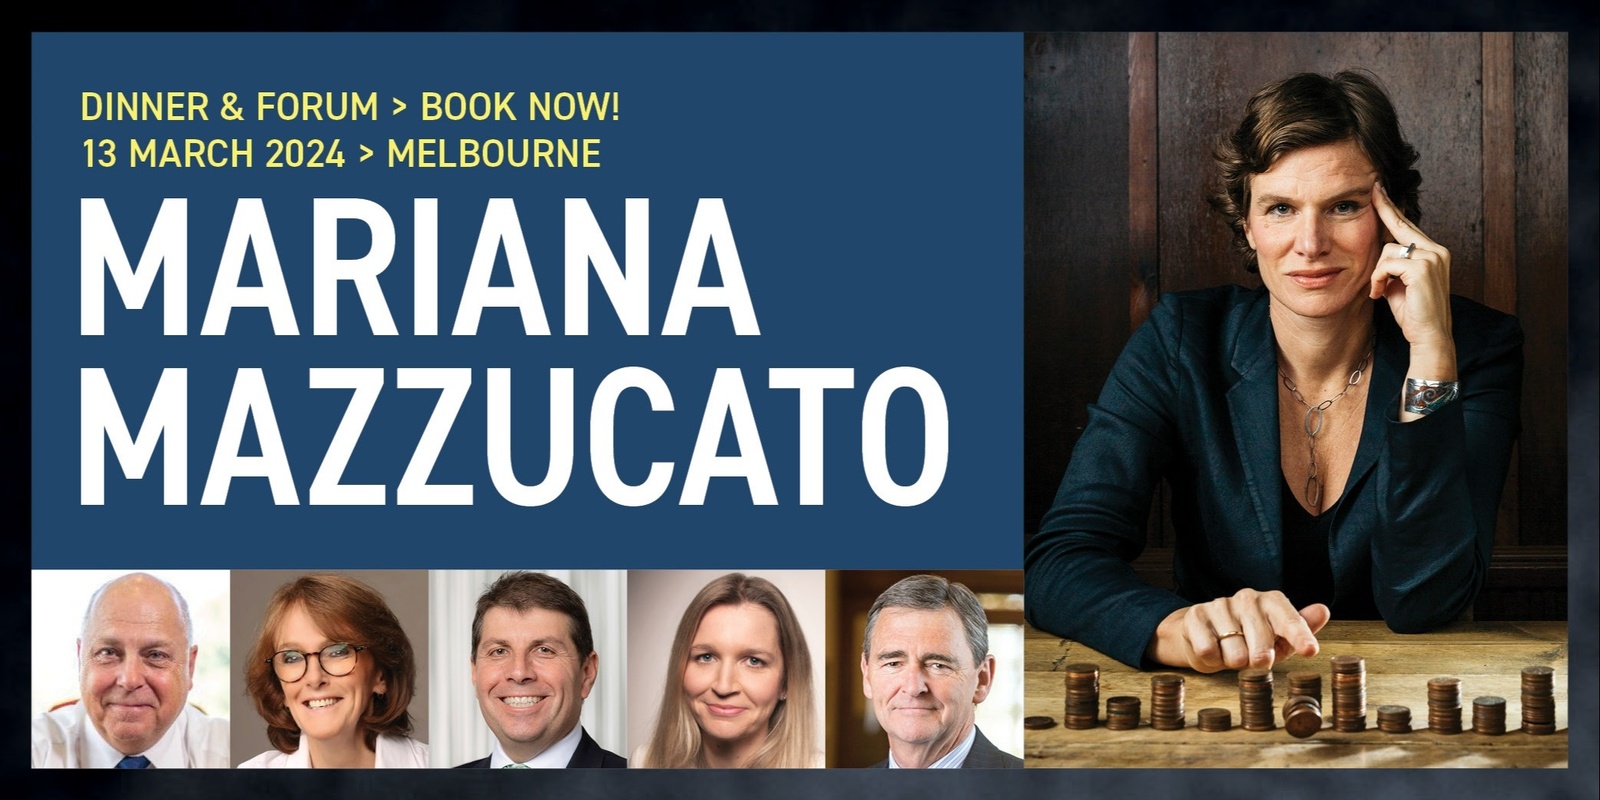 Banner image for Mariana Mazzucato - The Mission-Led Australia Tour - Melbourne Forum & Dinner